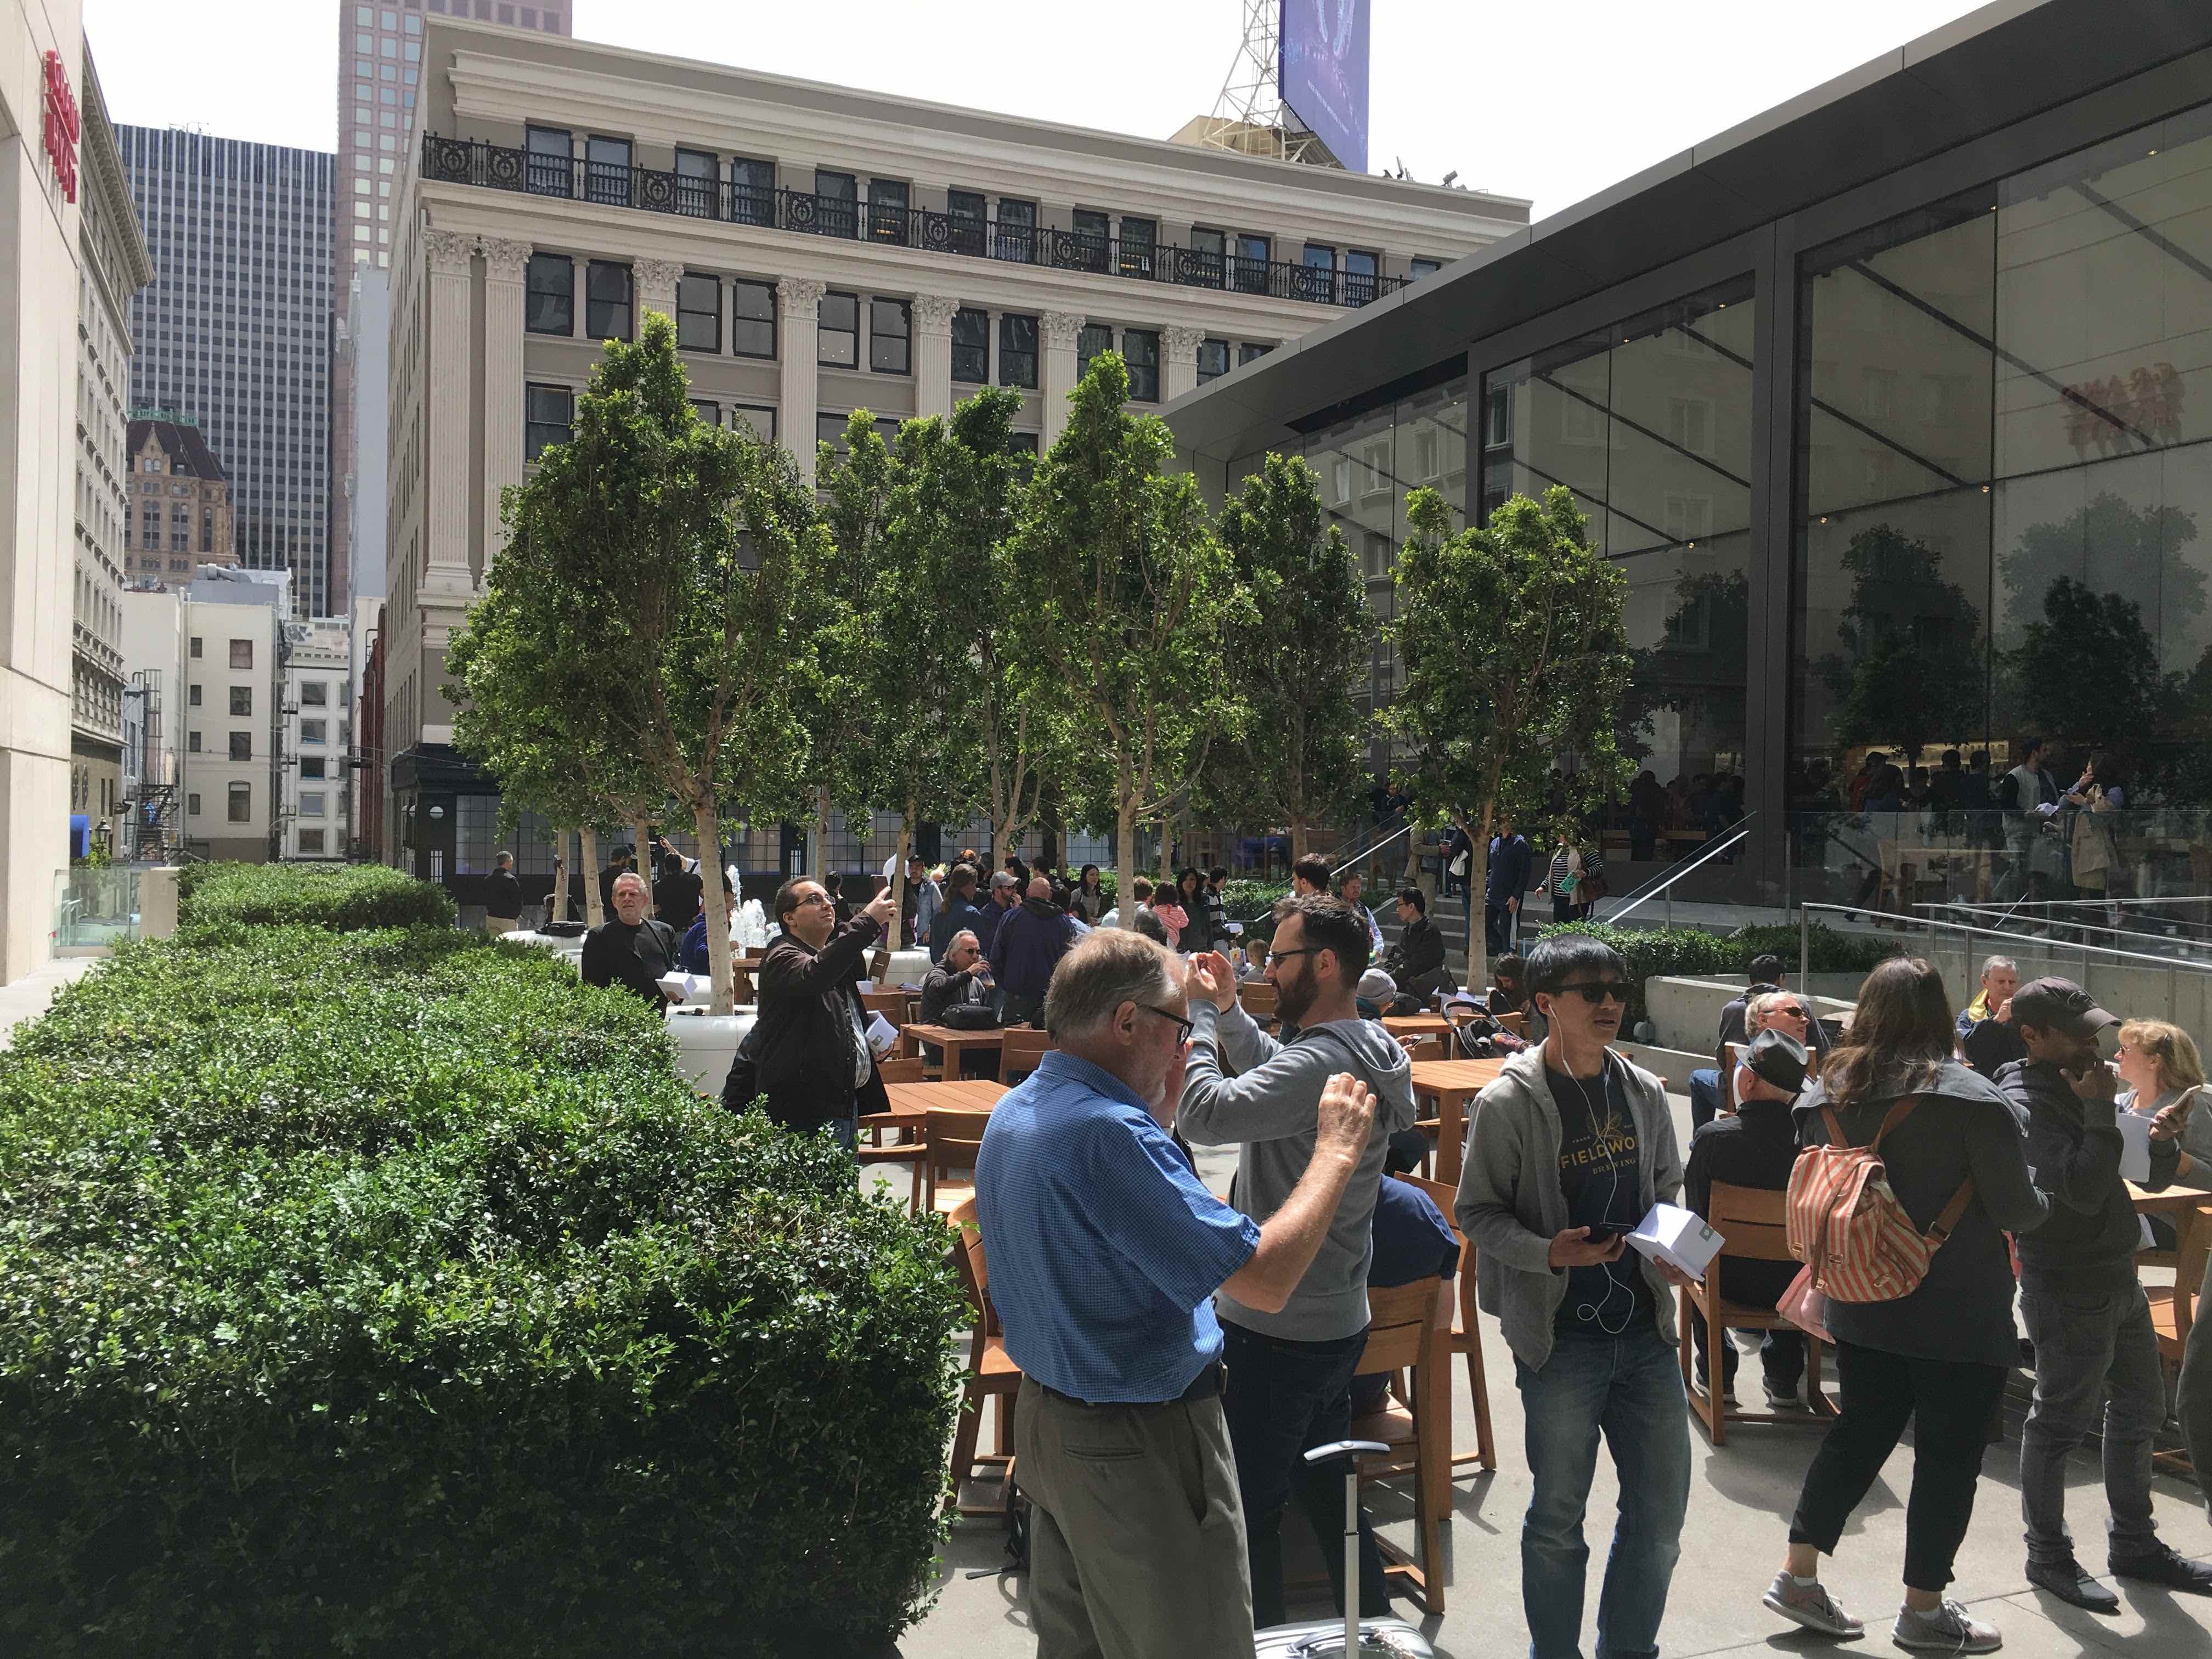 The Plaza at the new Apple Store in San Francisco's Union Square neighborhood.